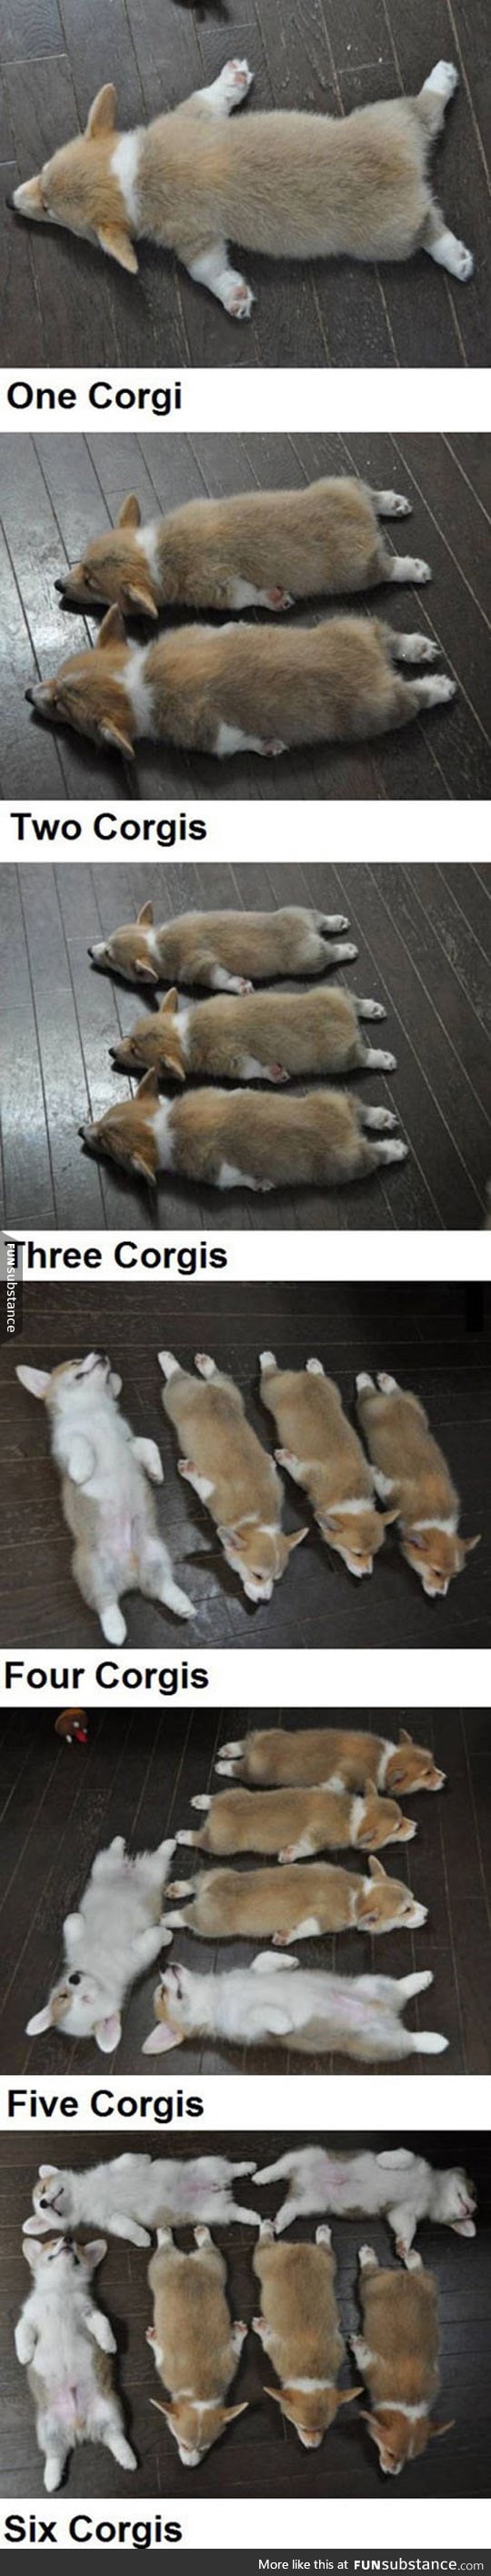 Just counting with corgis